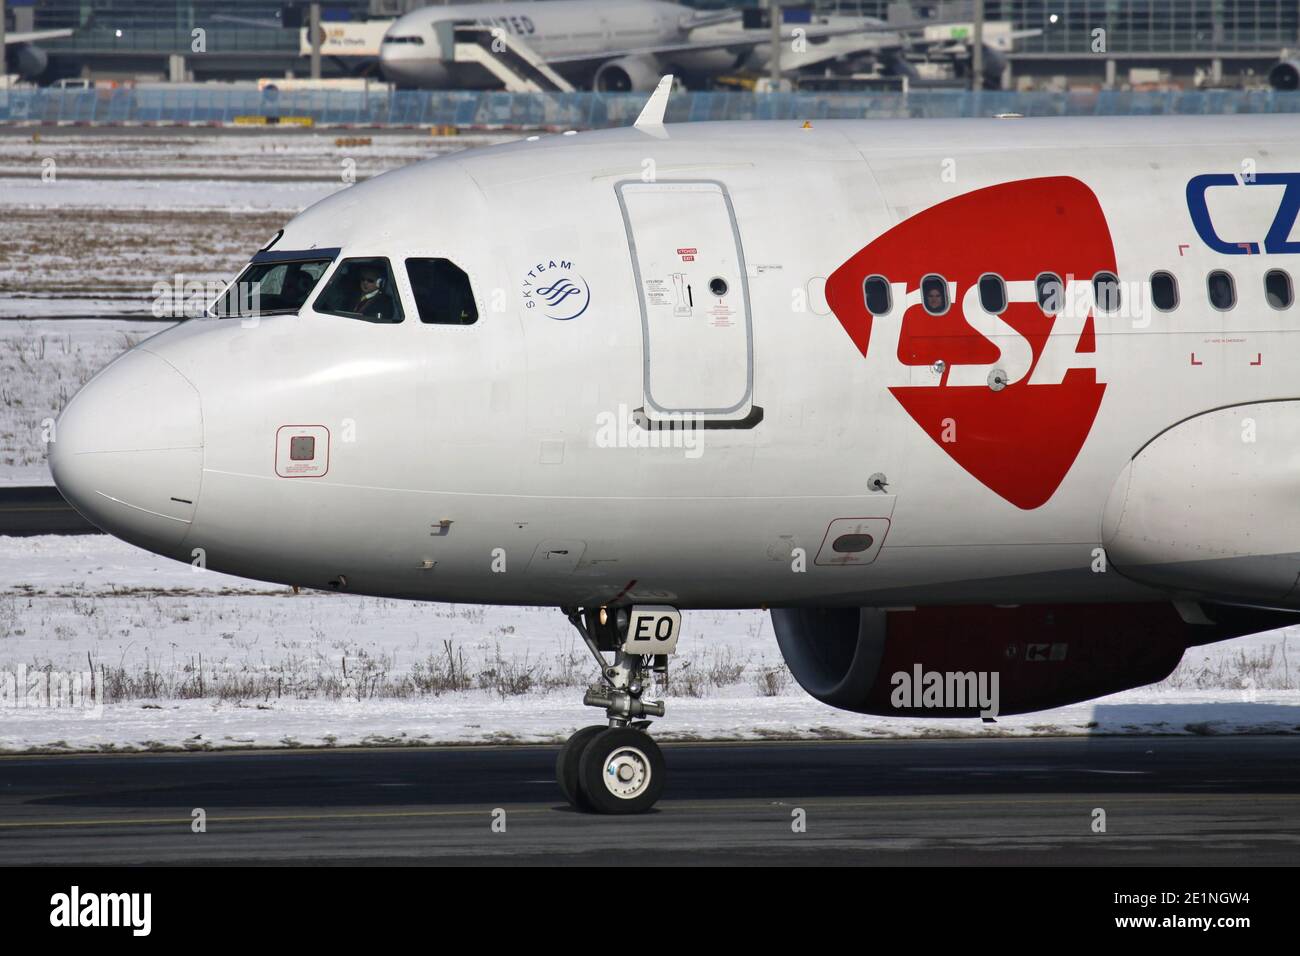 CSA Czech Airlines Airbus A319-100 with registration OK-NEO on taxiway at Frankfurt Airport. Stock Photo